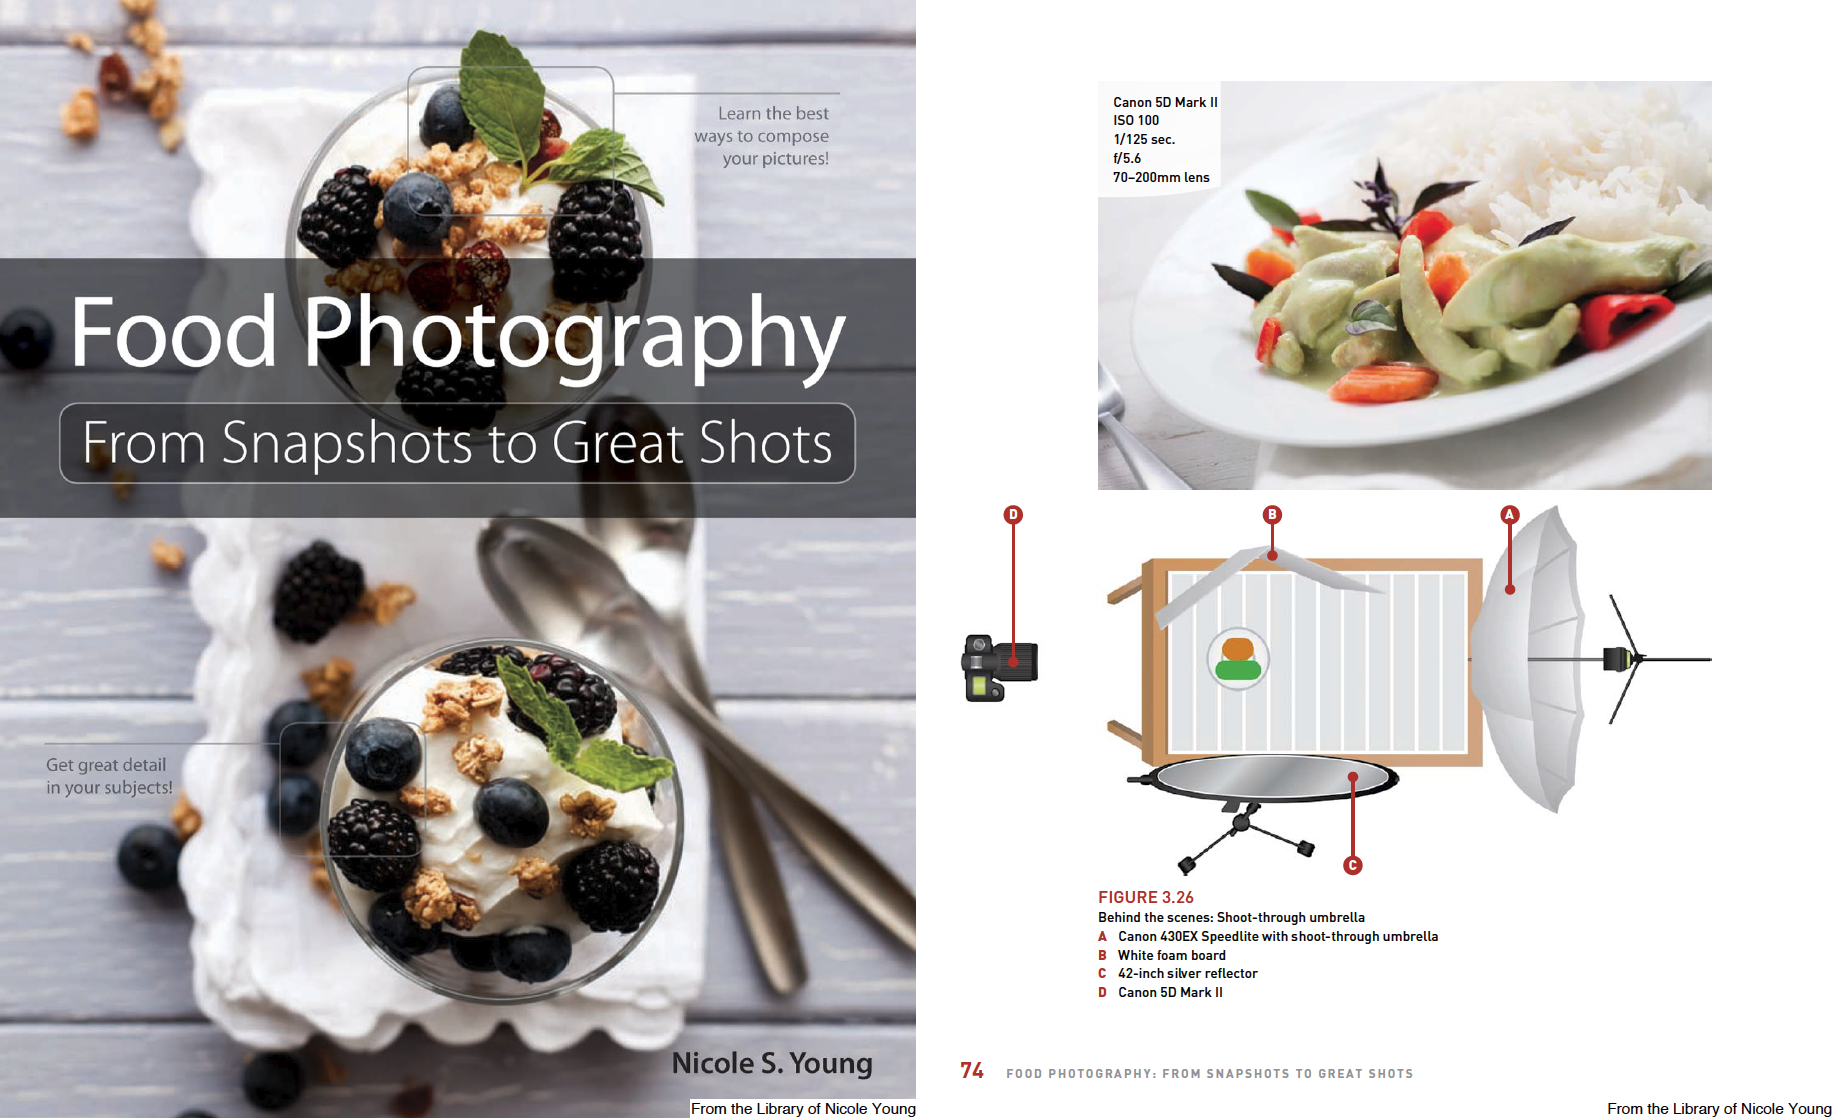 Food Photography: Books and Classes